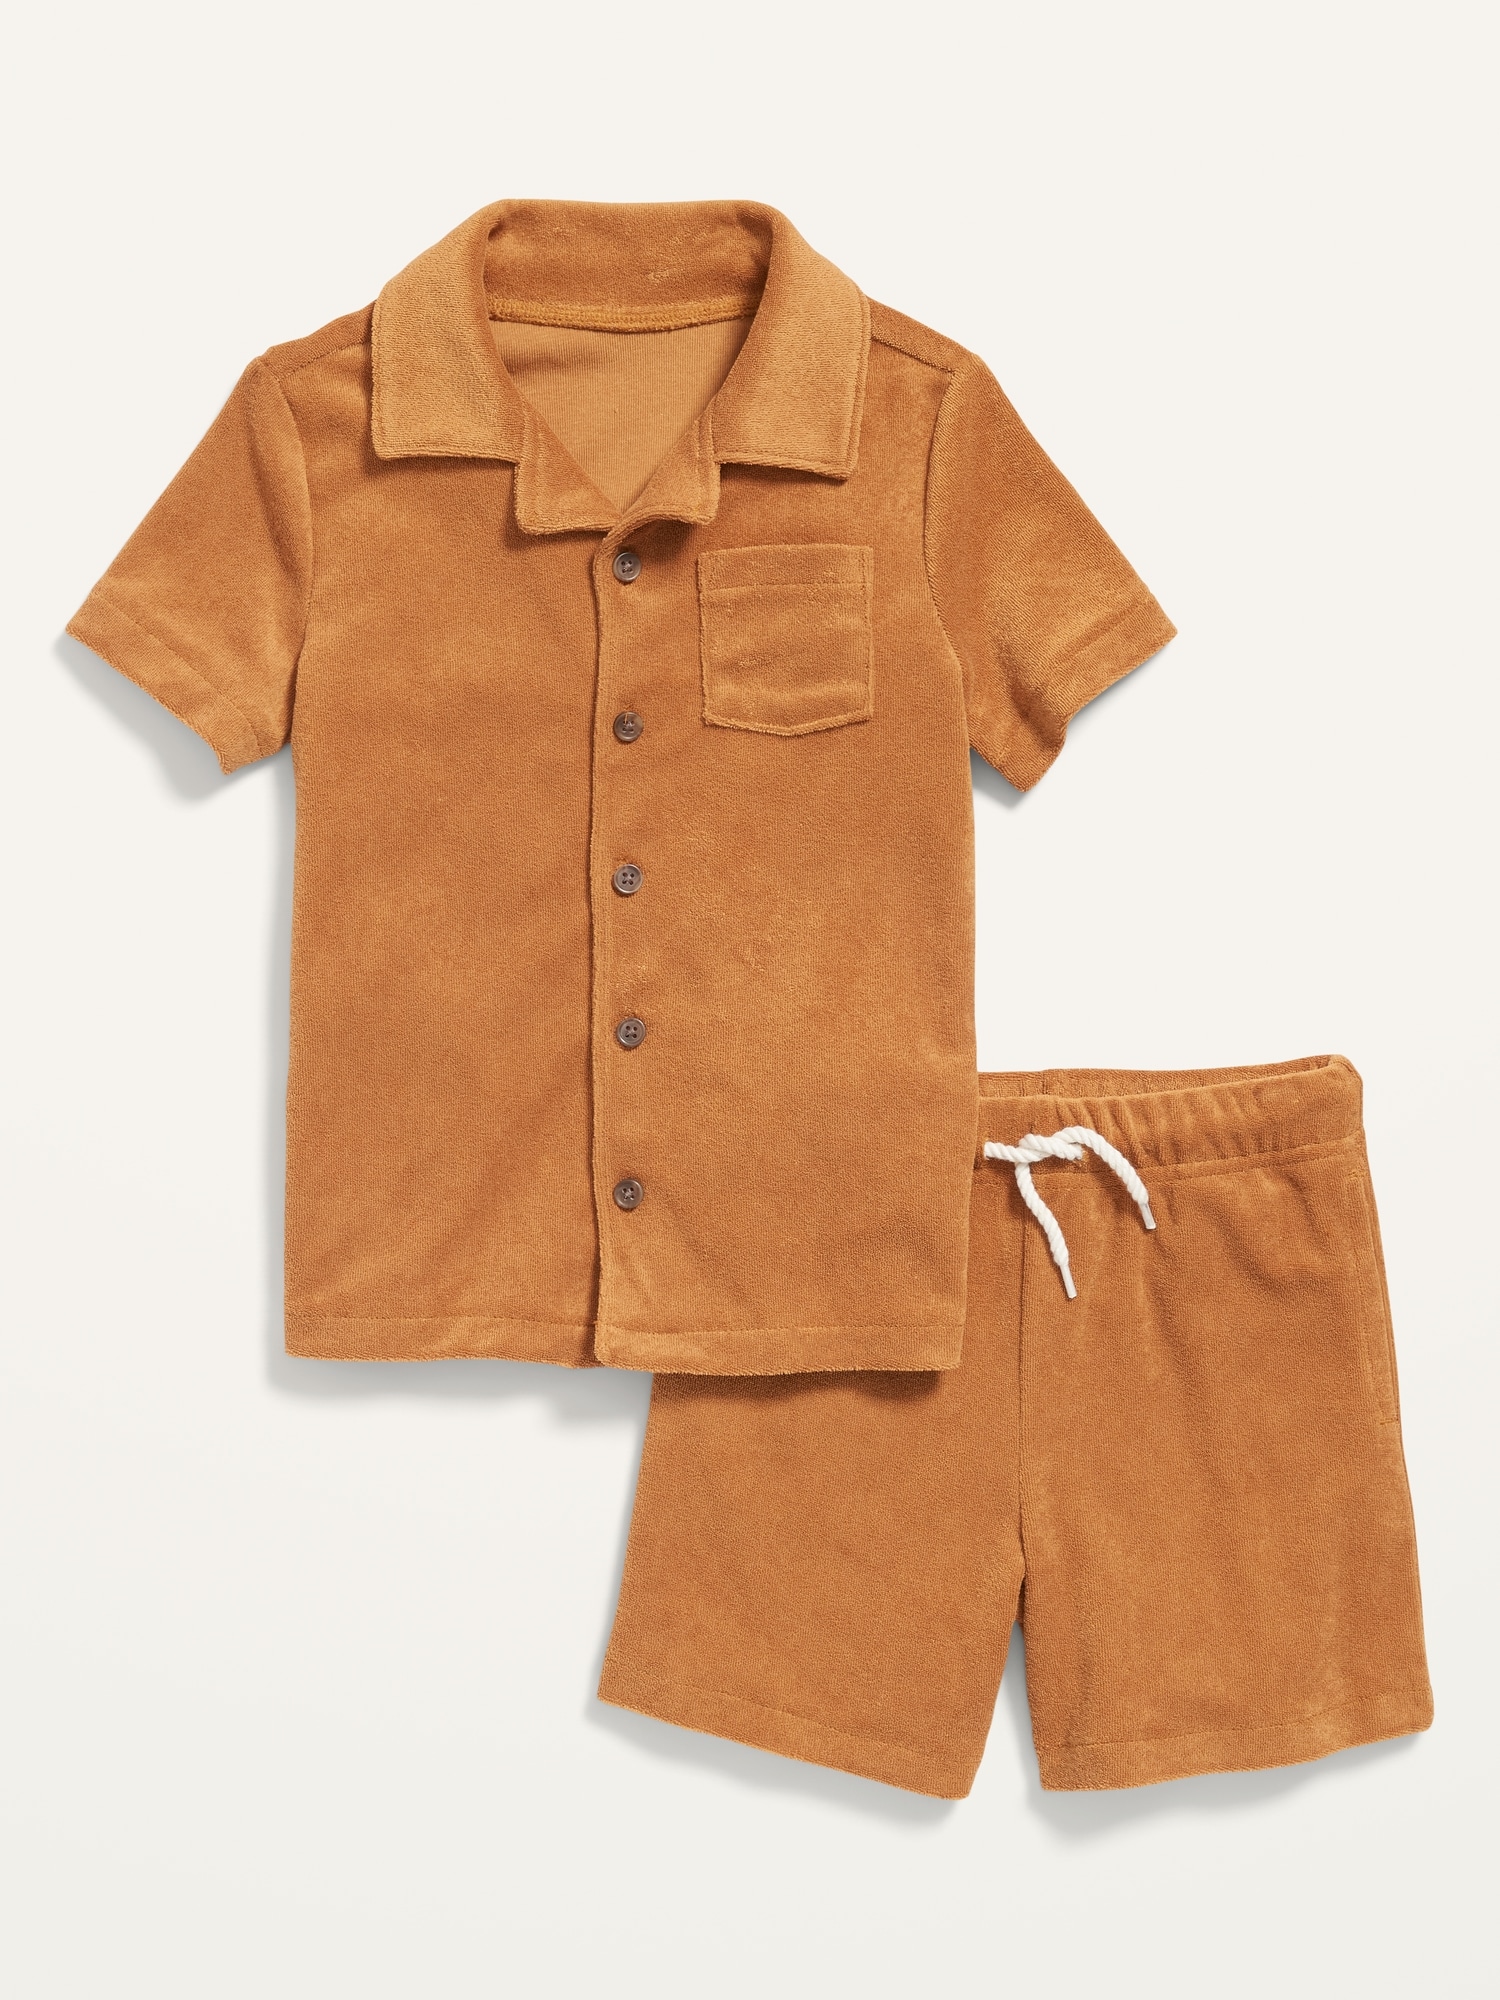 Old Navy Short-Sleeve Loop-Terry Shirt and Shorts Set for Toddler Boys orange. 1